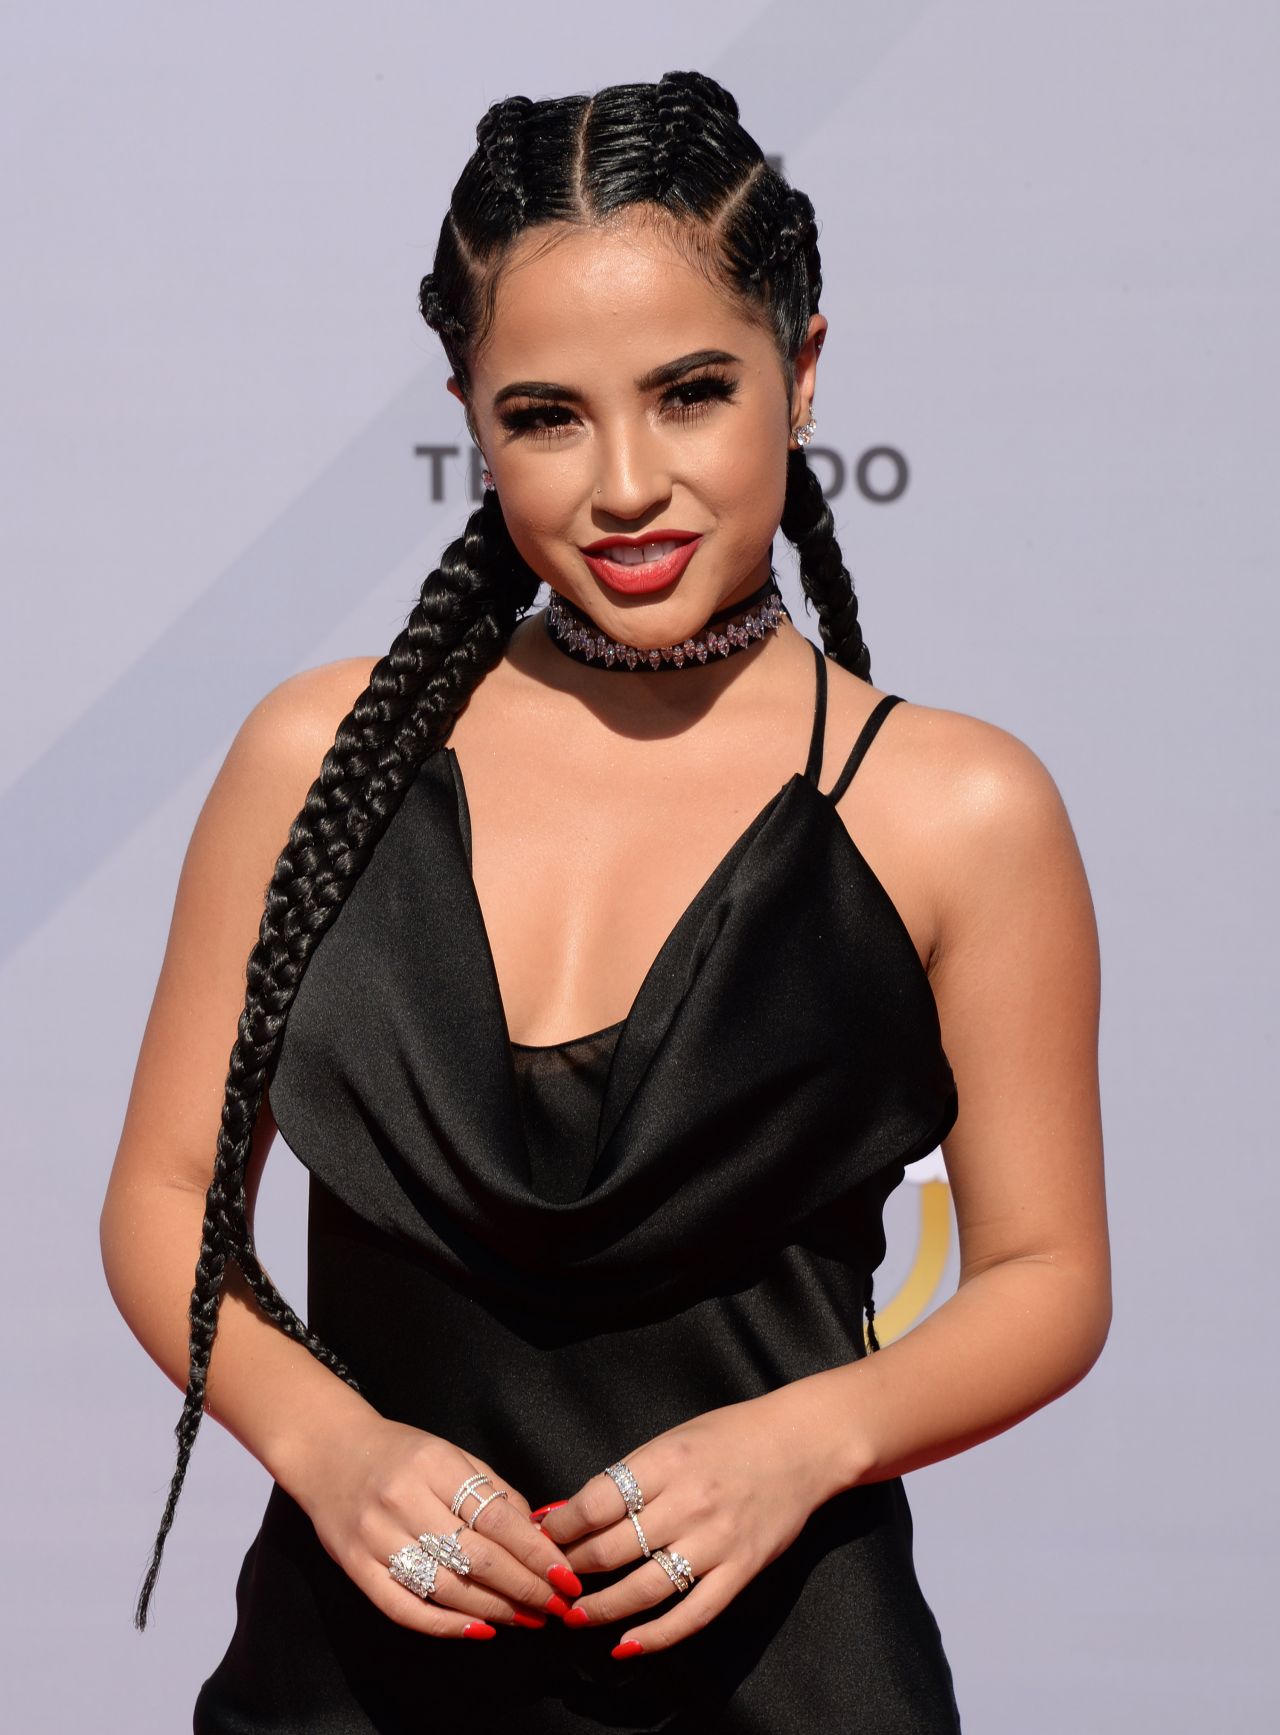 Becky G photo gallery high quality pics of Becky G ThePlace